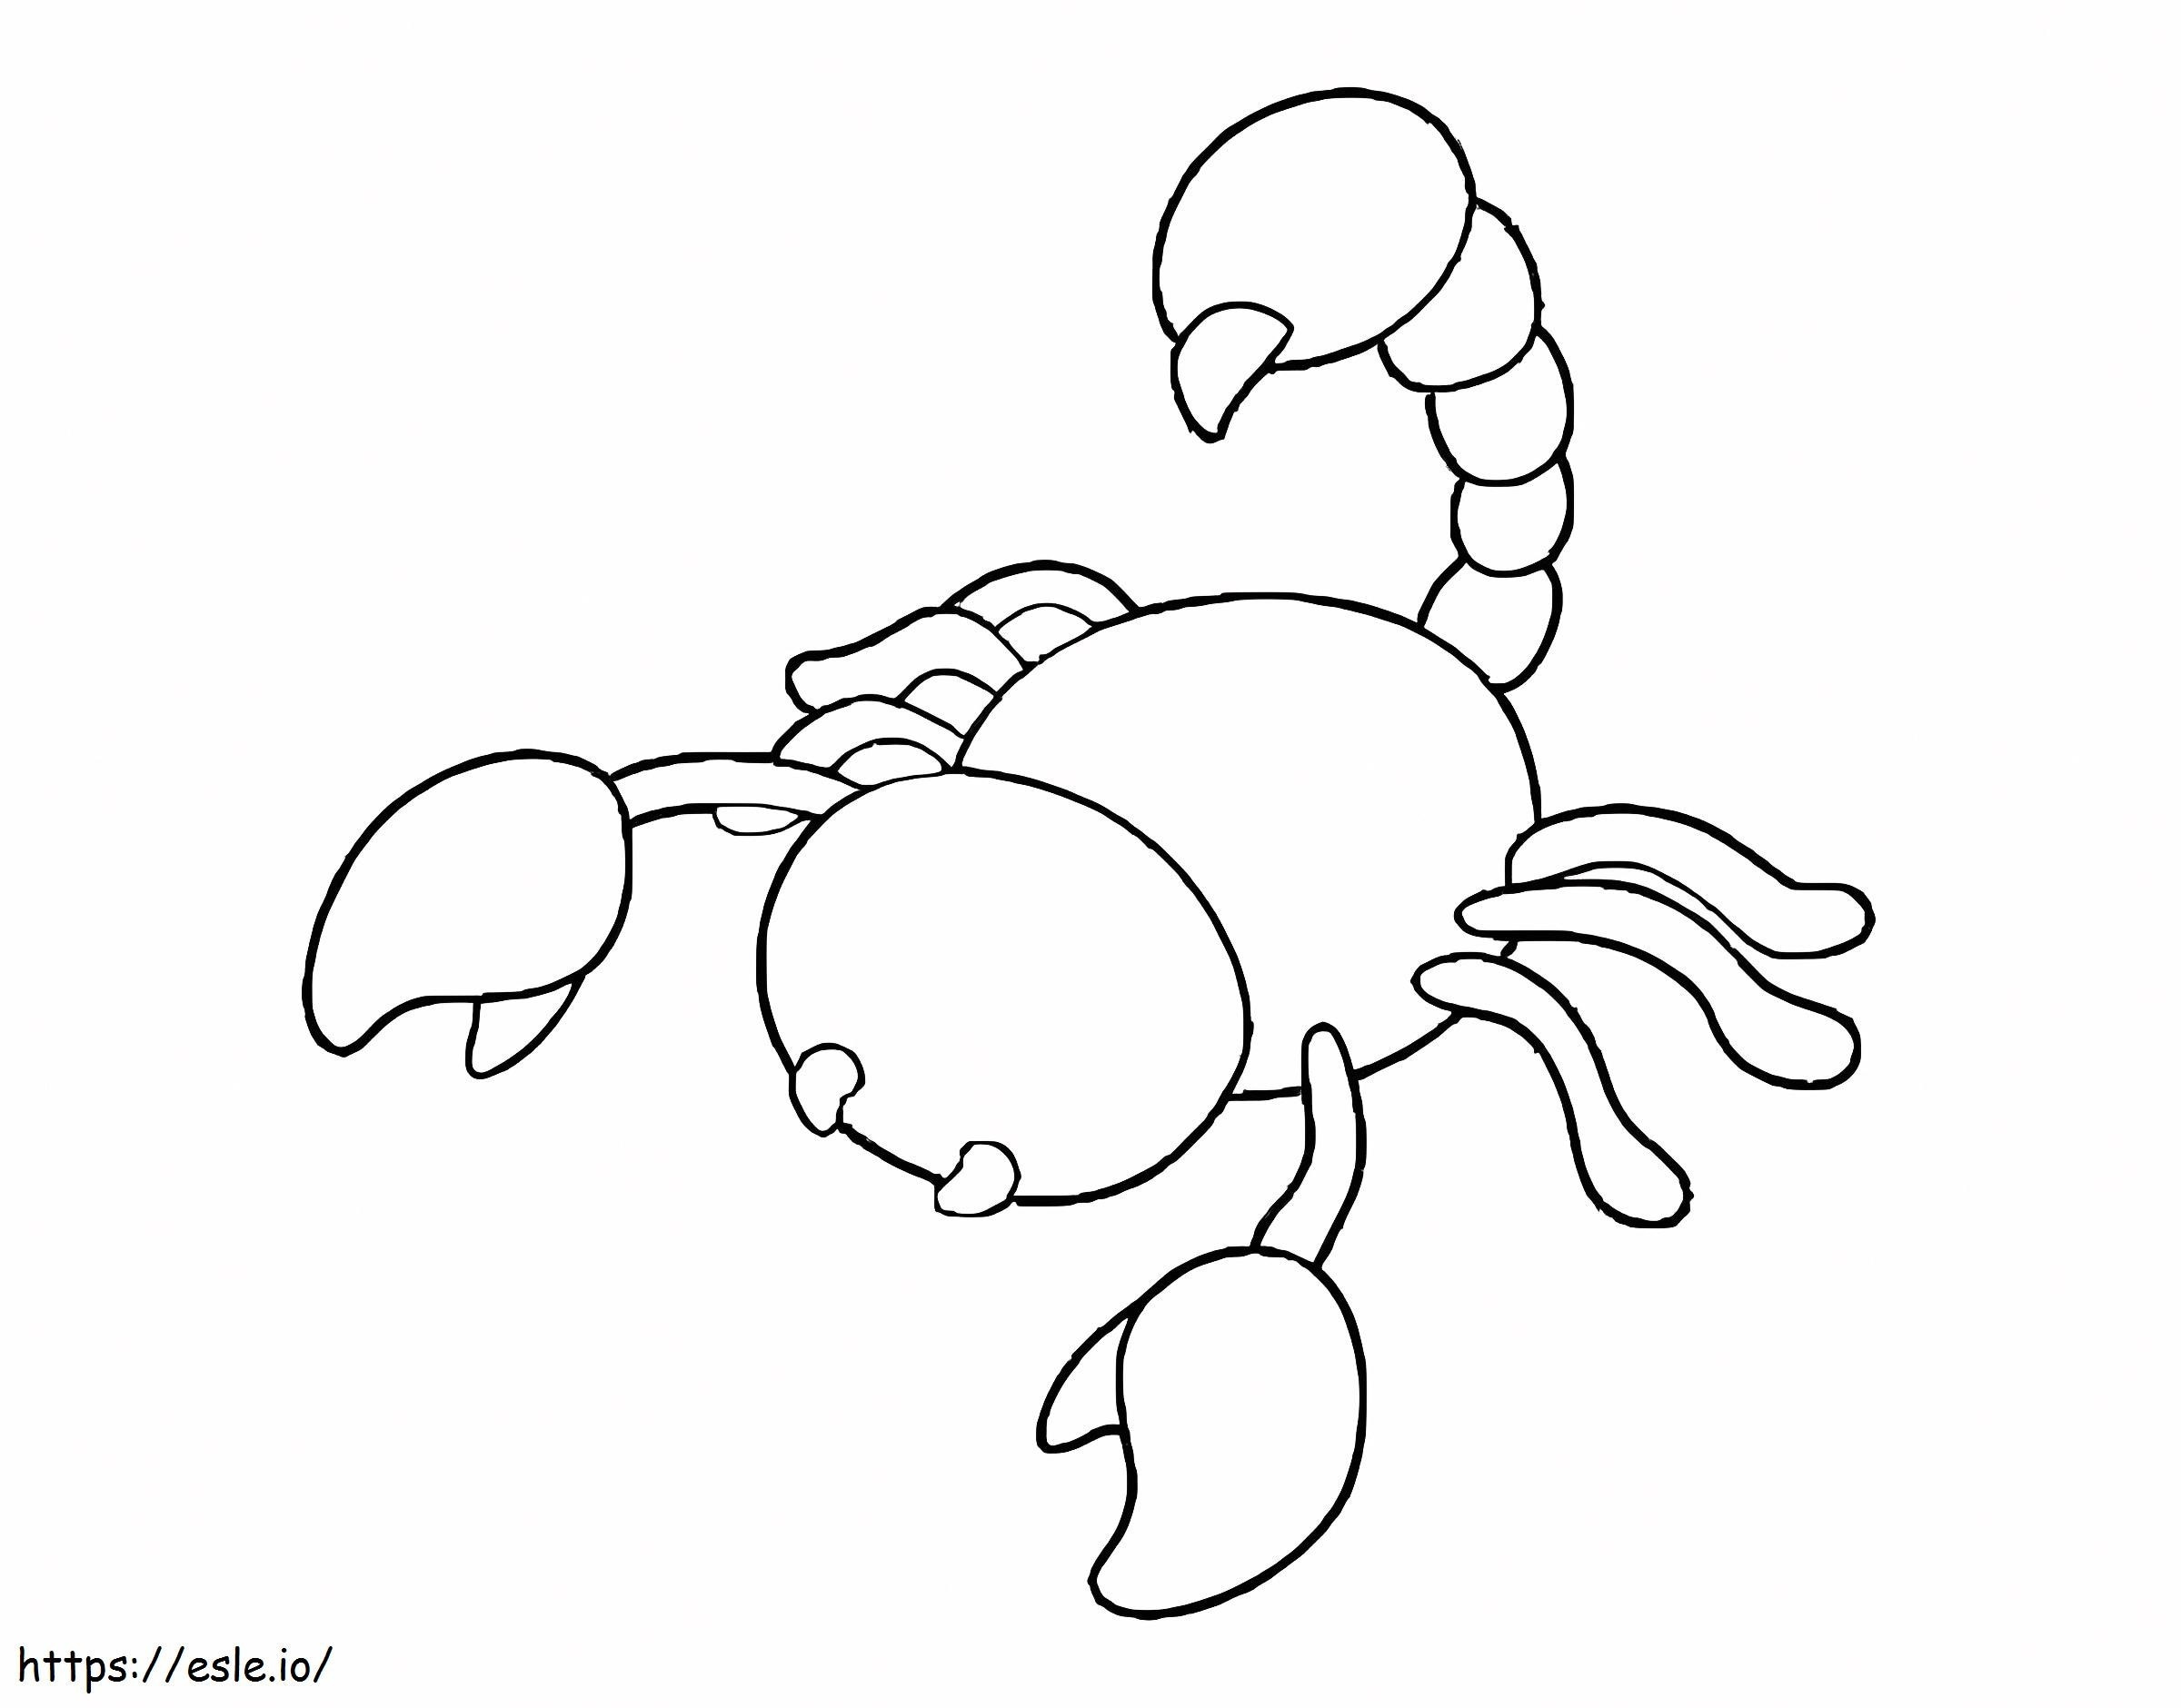 Simple Scorpion coloring page